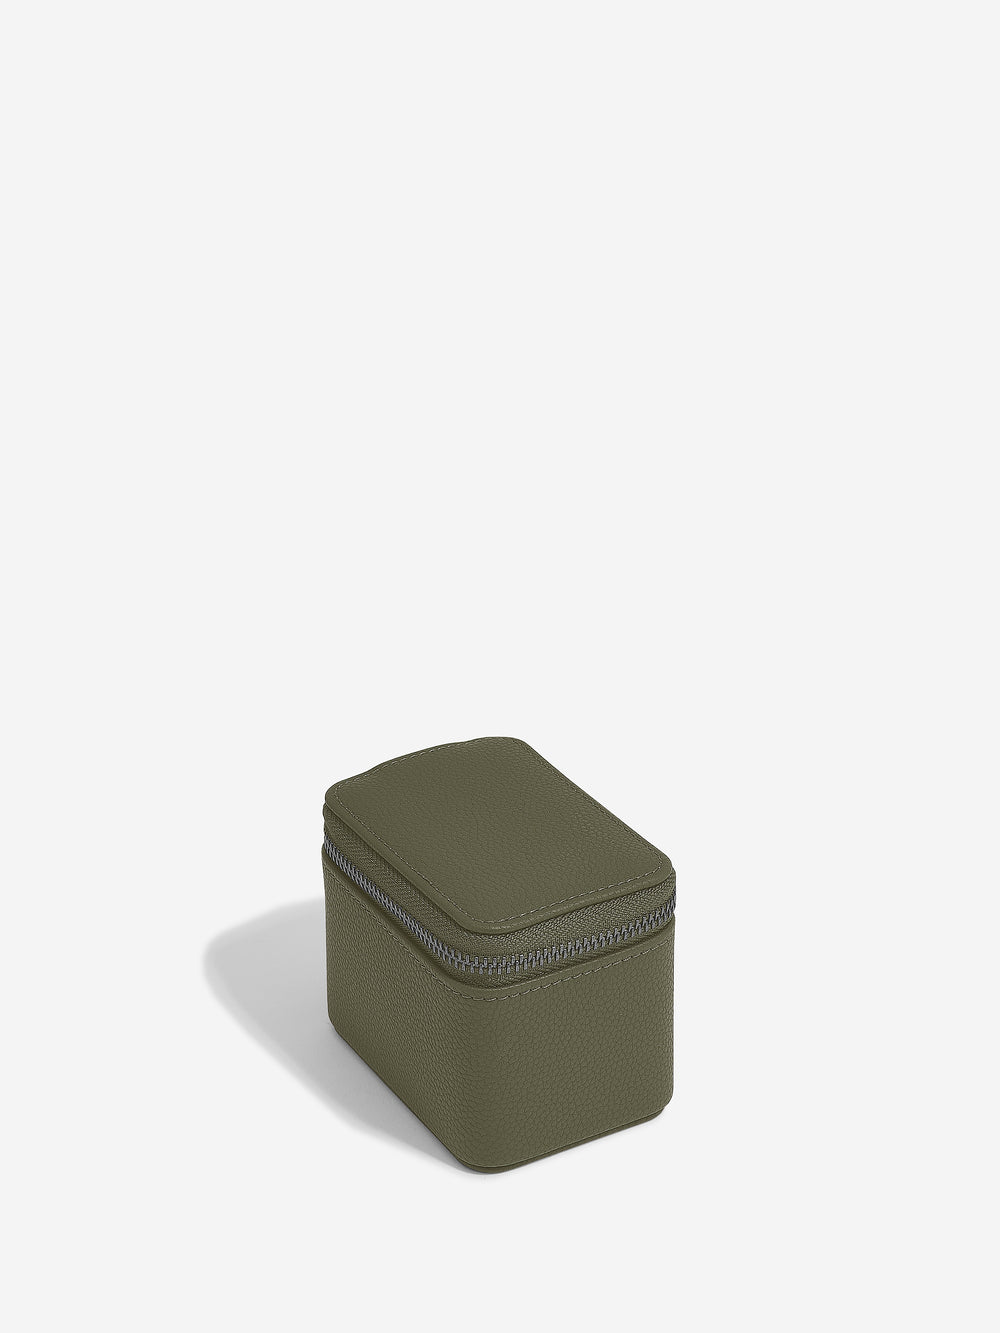 Stackers | Travel Watch Box - Olive Green